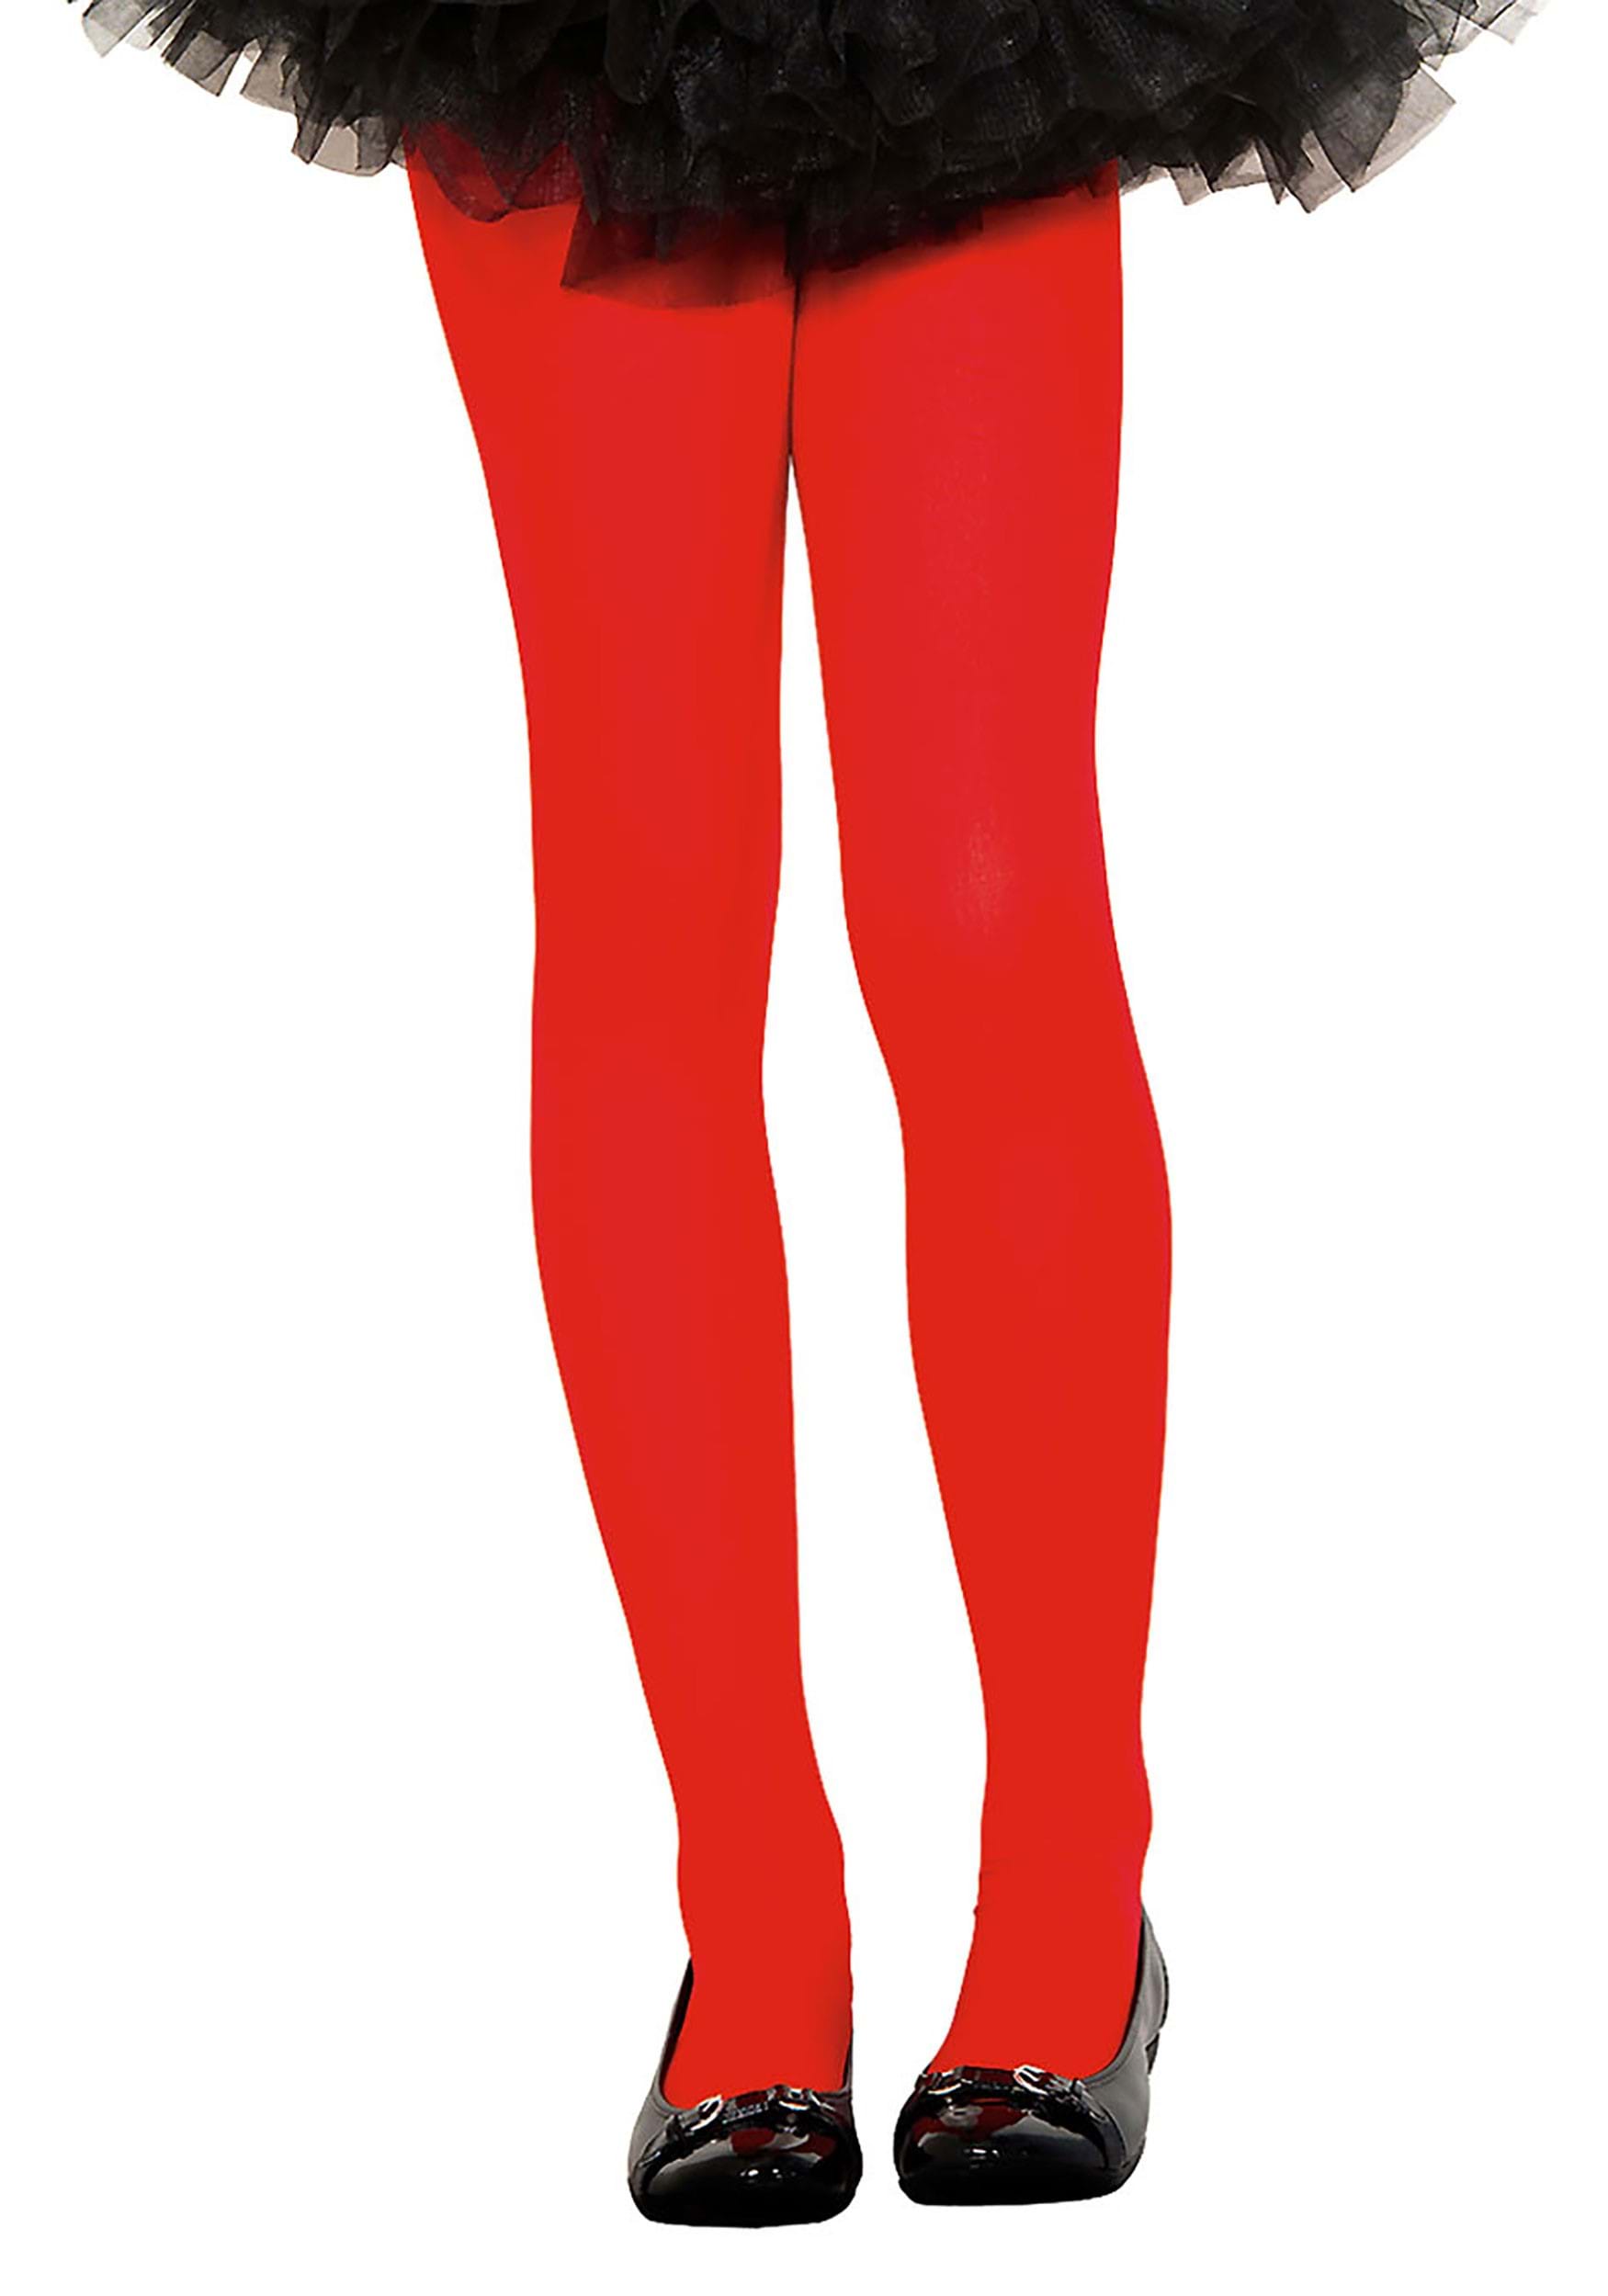 https://images.halloweencostumes.ca/products/93459/1-1/kids-red-opaque-tights.jpg